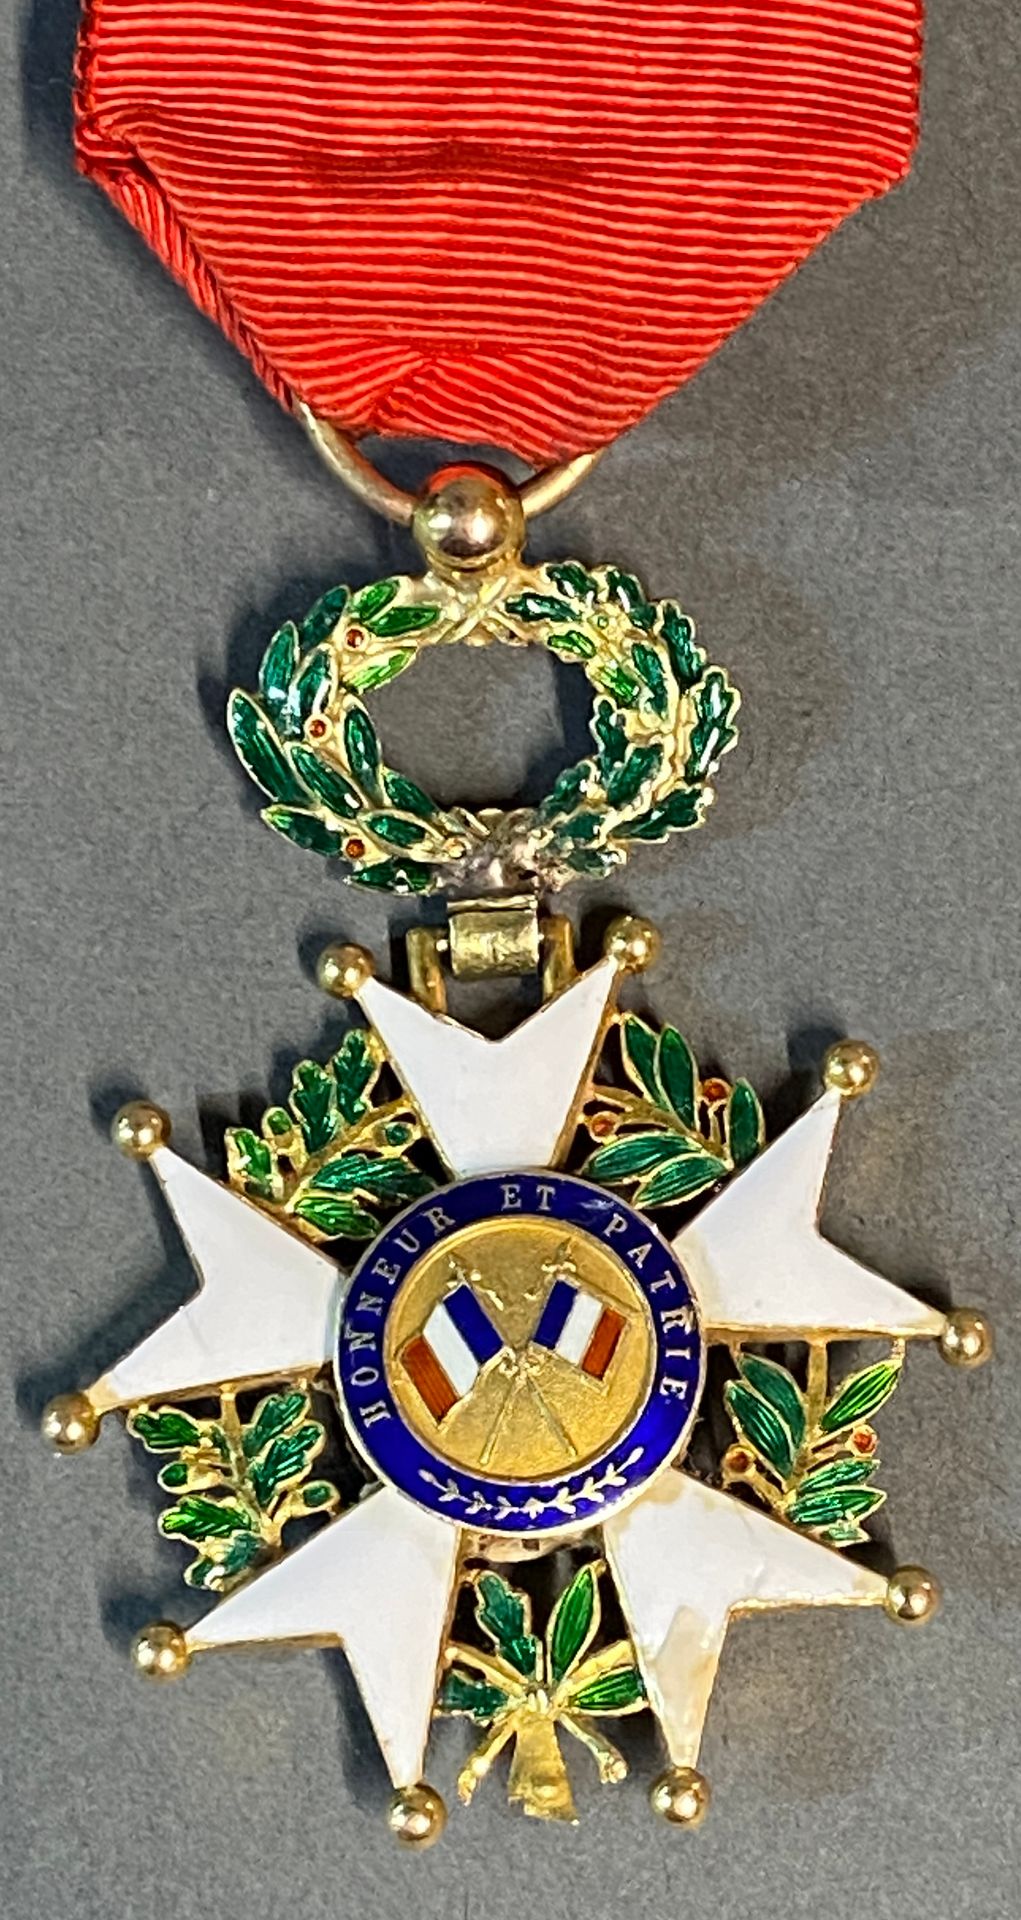 Null Legion of Honor instituted in 1802

Two crosses of officer of the Legion of&hellip;